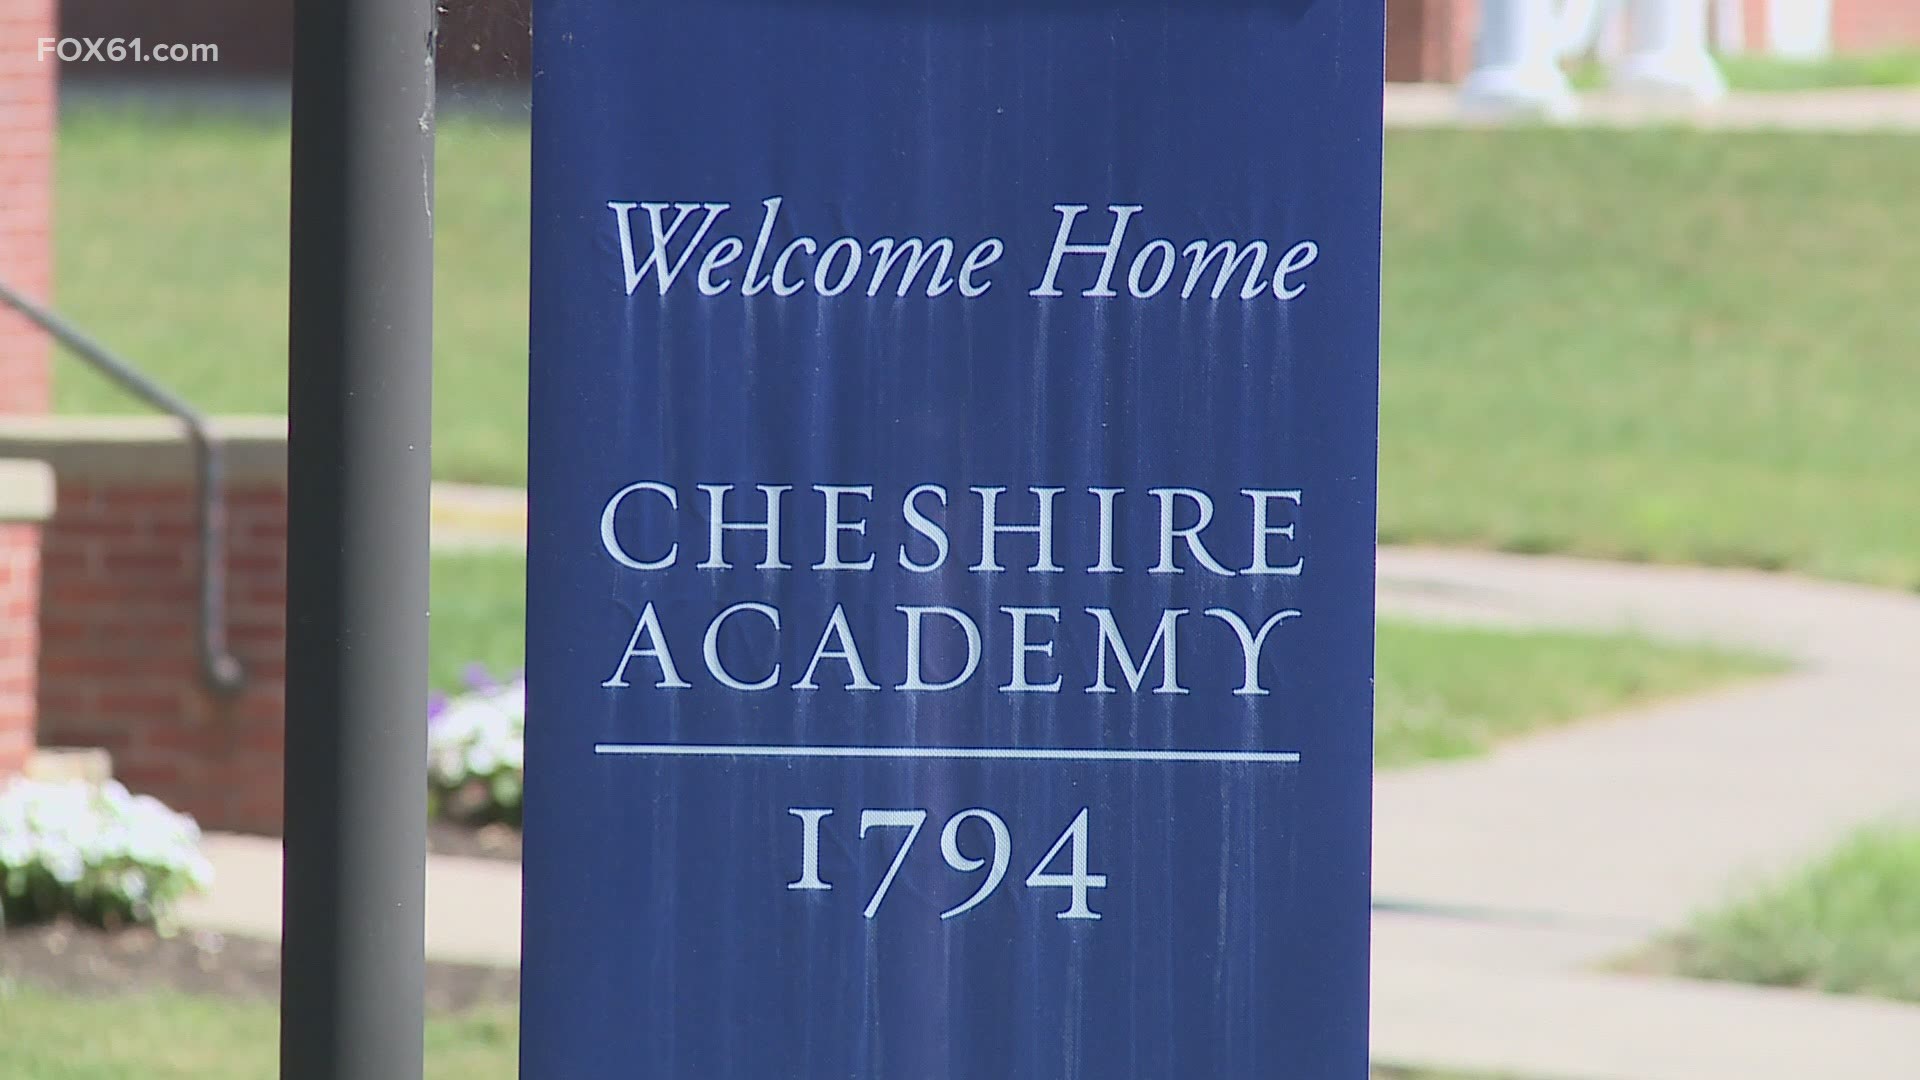 A former student of Cheshire Academy claims that a ex-teacher sexually abused her and that the school could have prevented it.